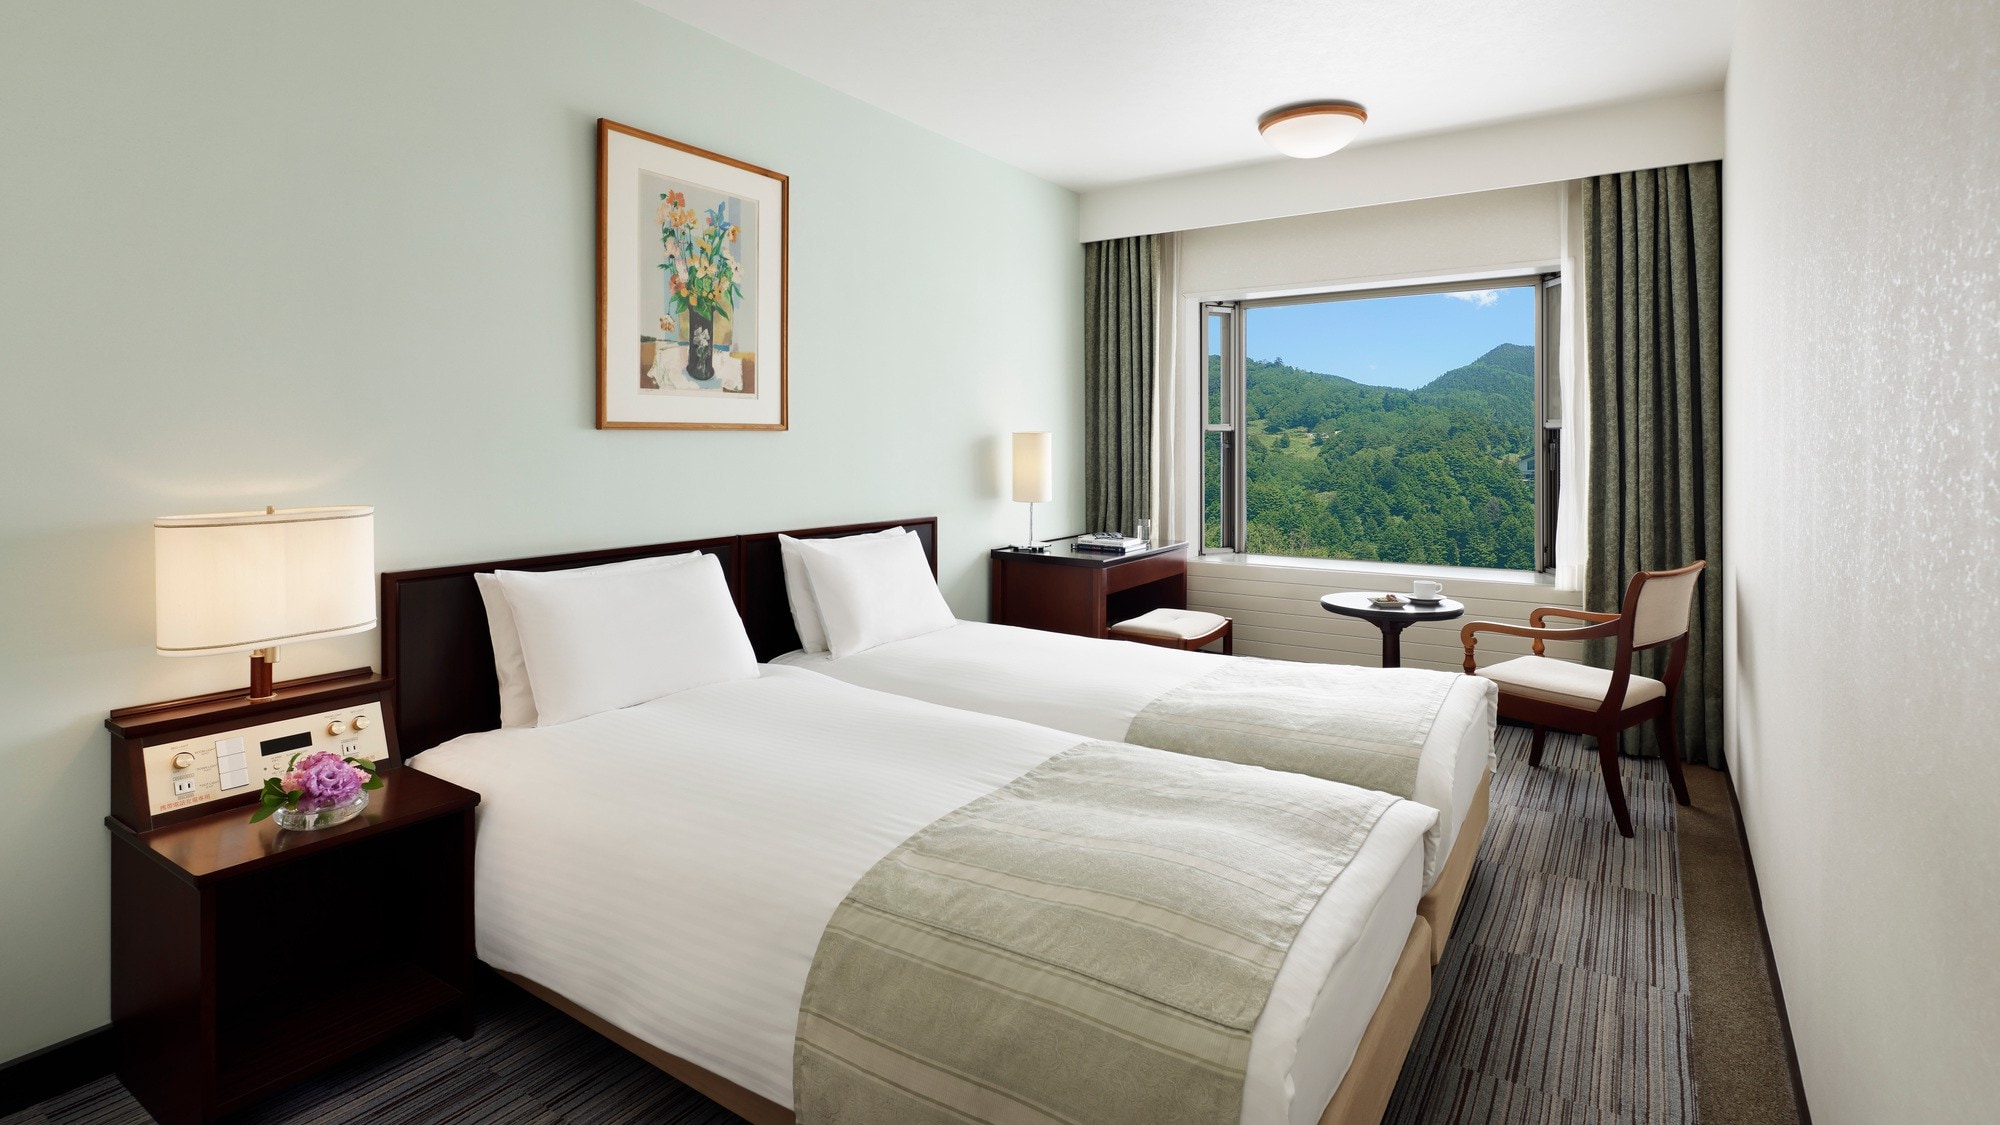 [East building twin room] A compact, easy-to-use guest room close to the hot spring bath.